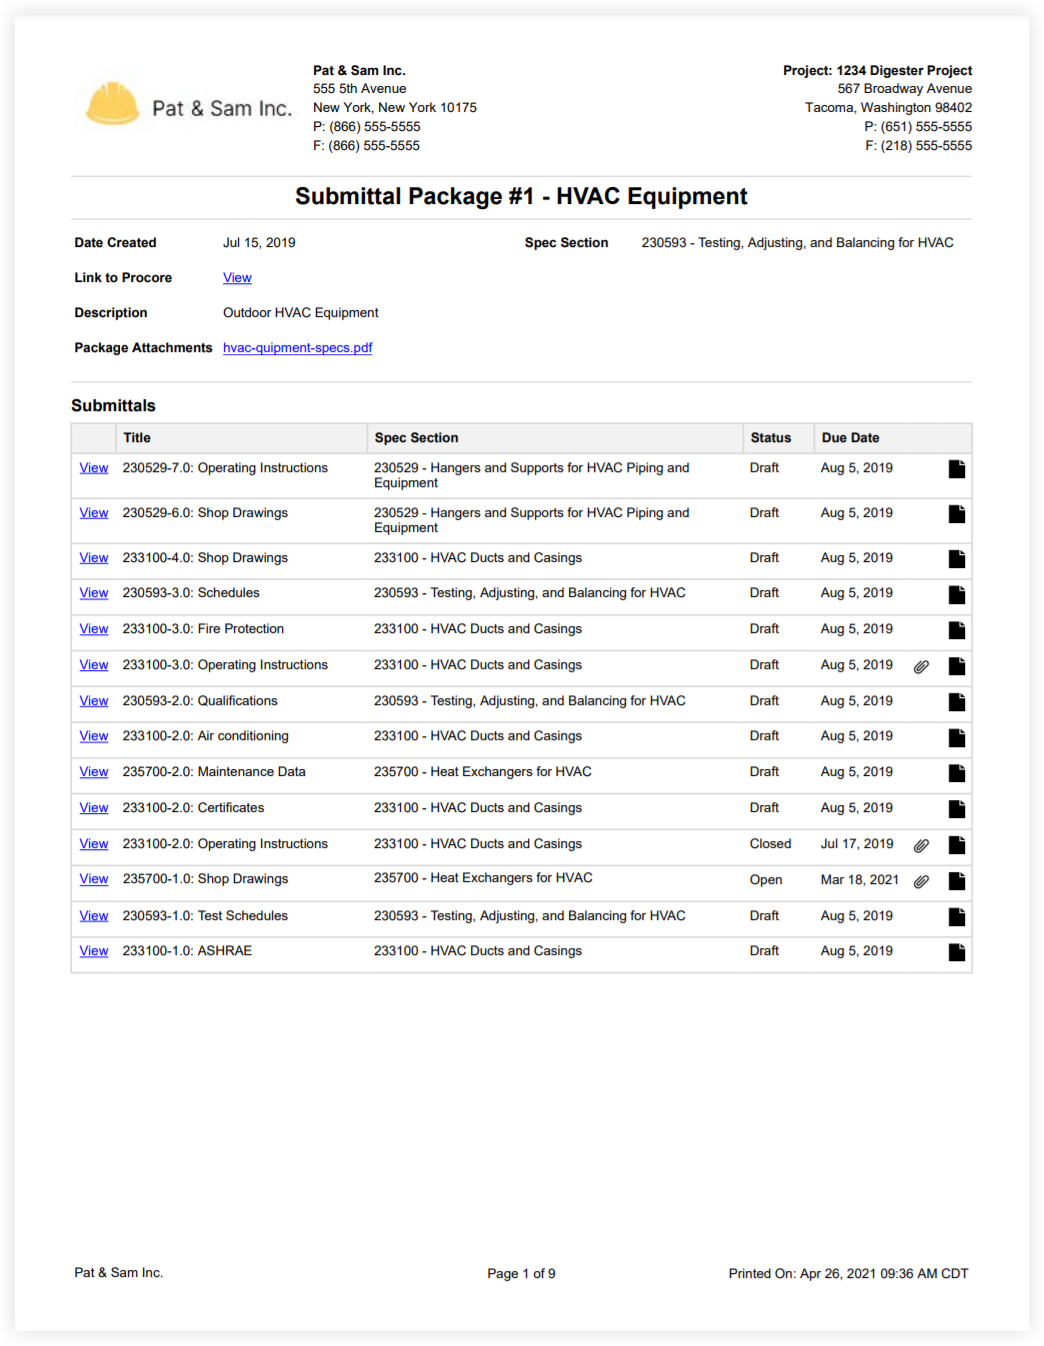 submittals-ann-updated-pdf-export-submittal-package-page-1.png